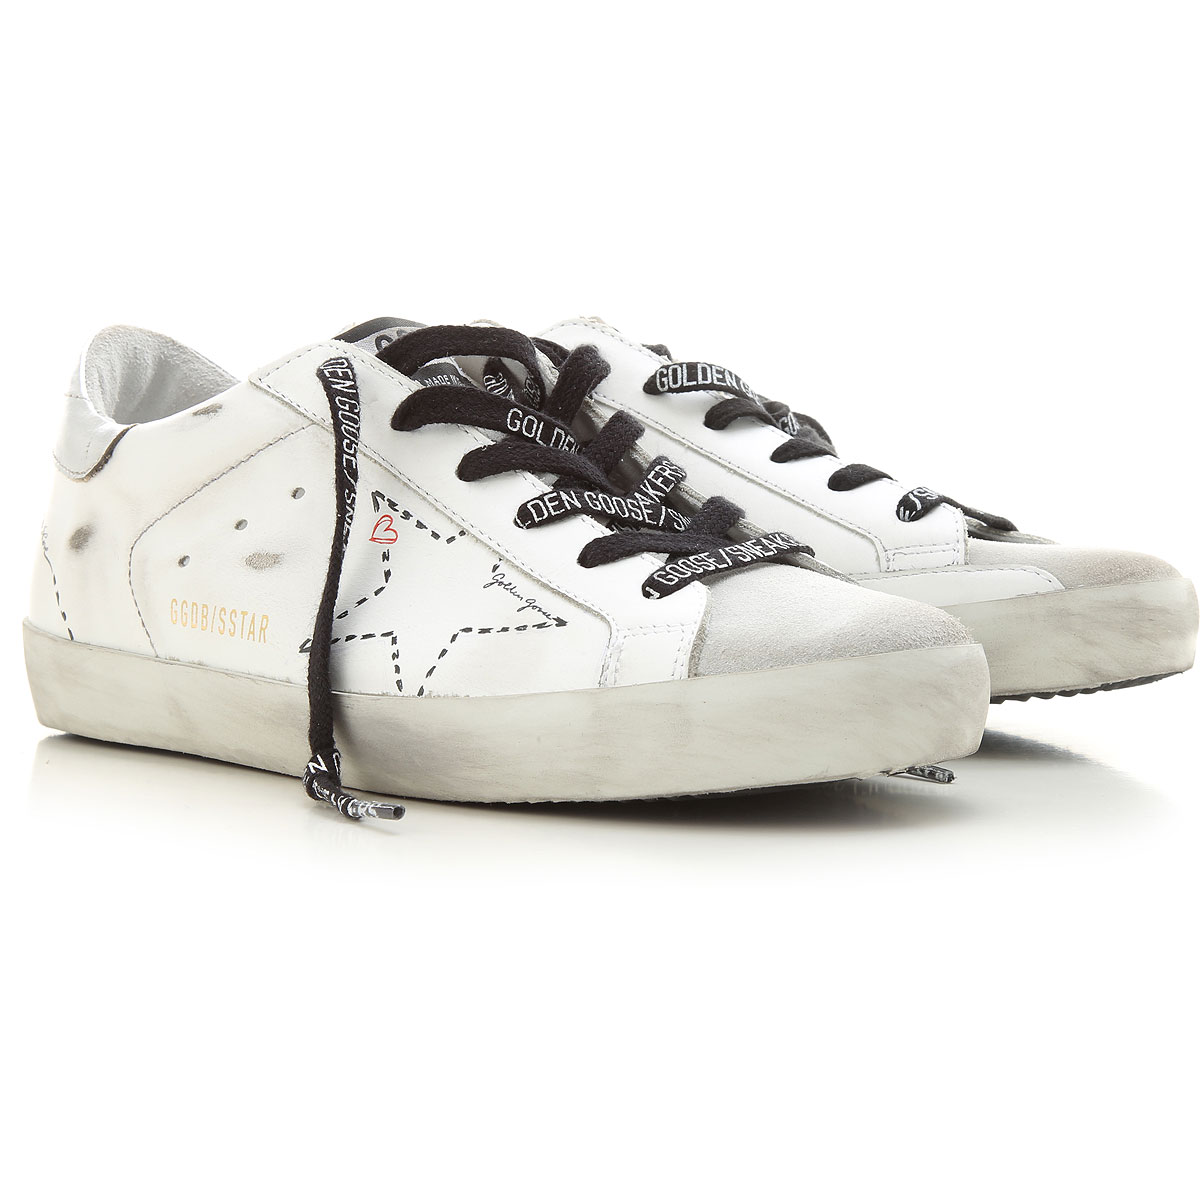 Womens Shoes Golden Goose, Style code: gwf00101-f000127-10212